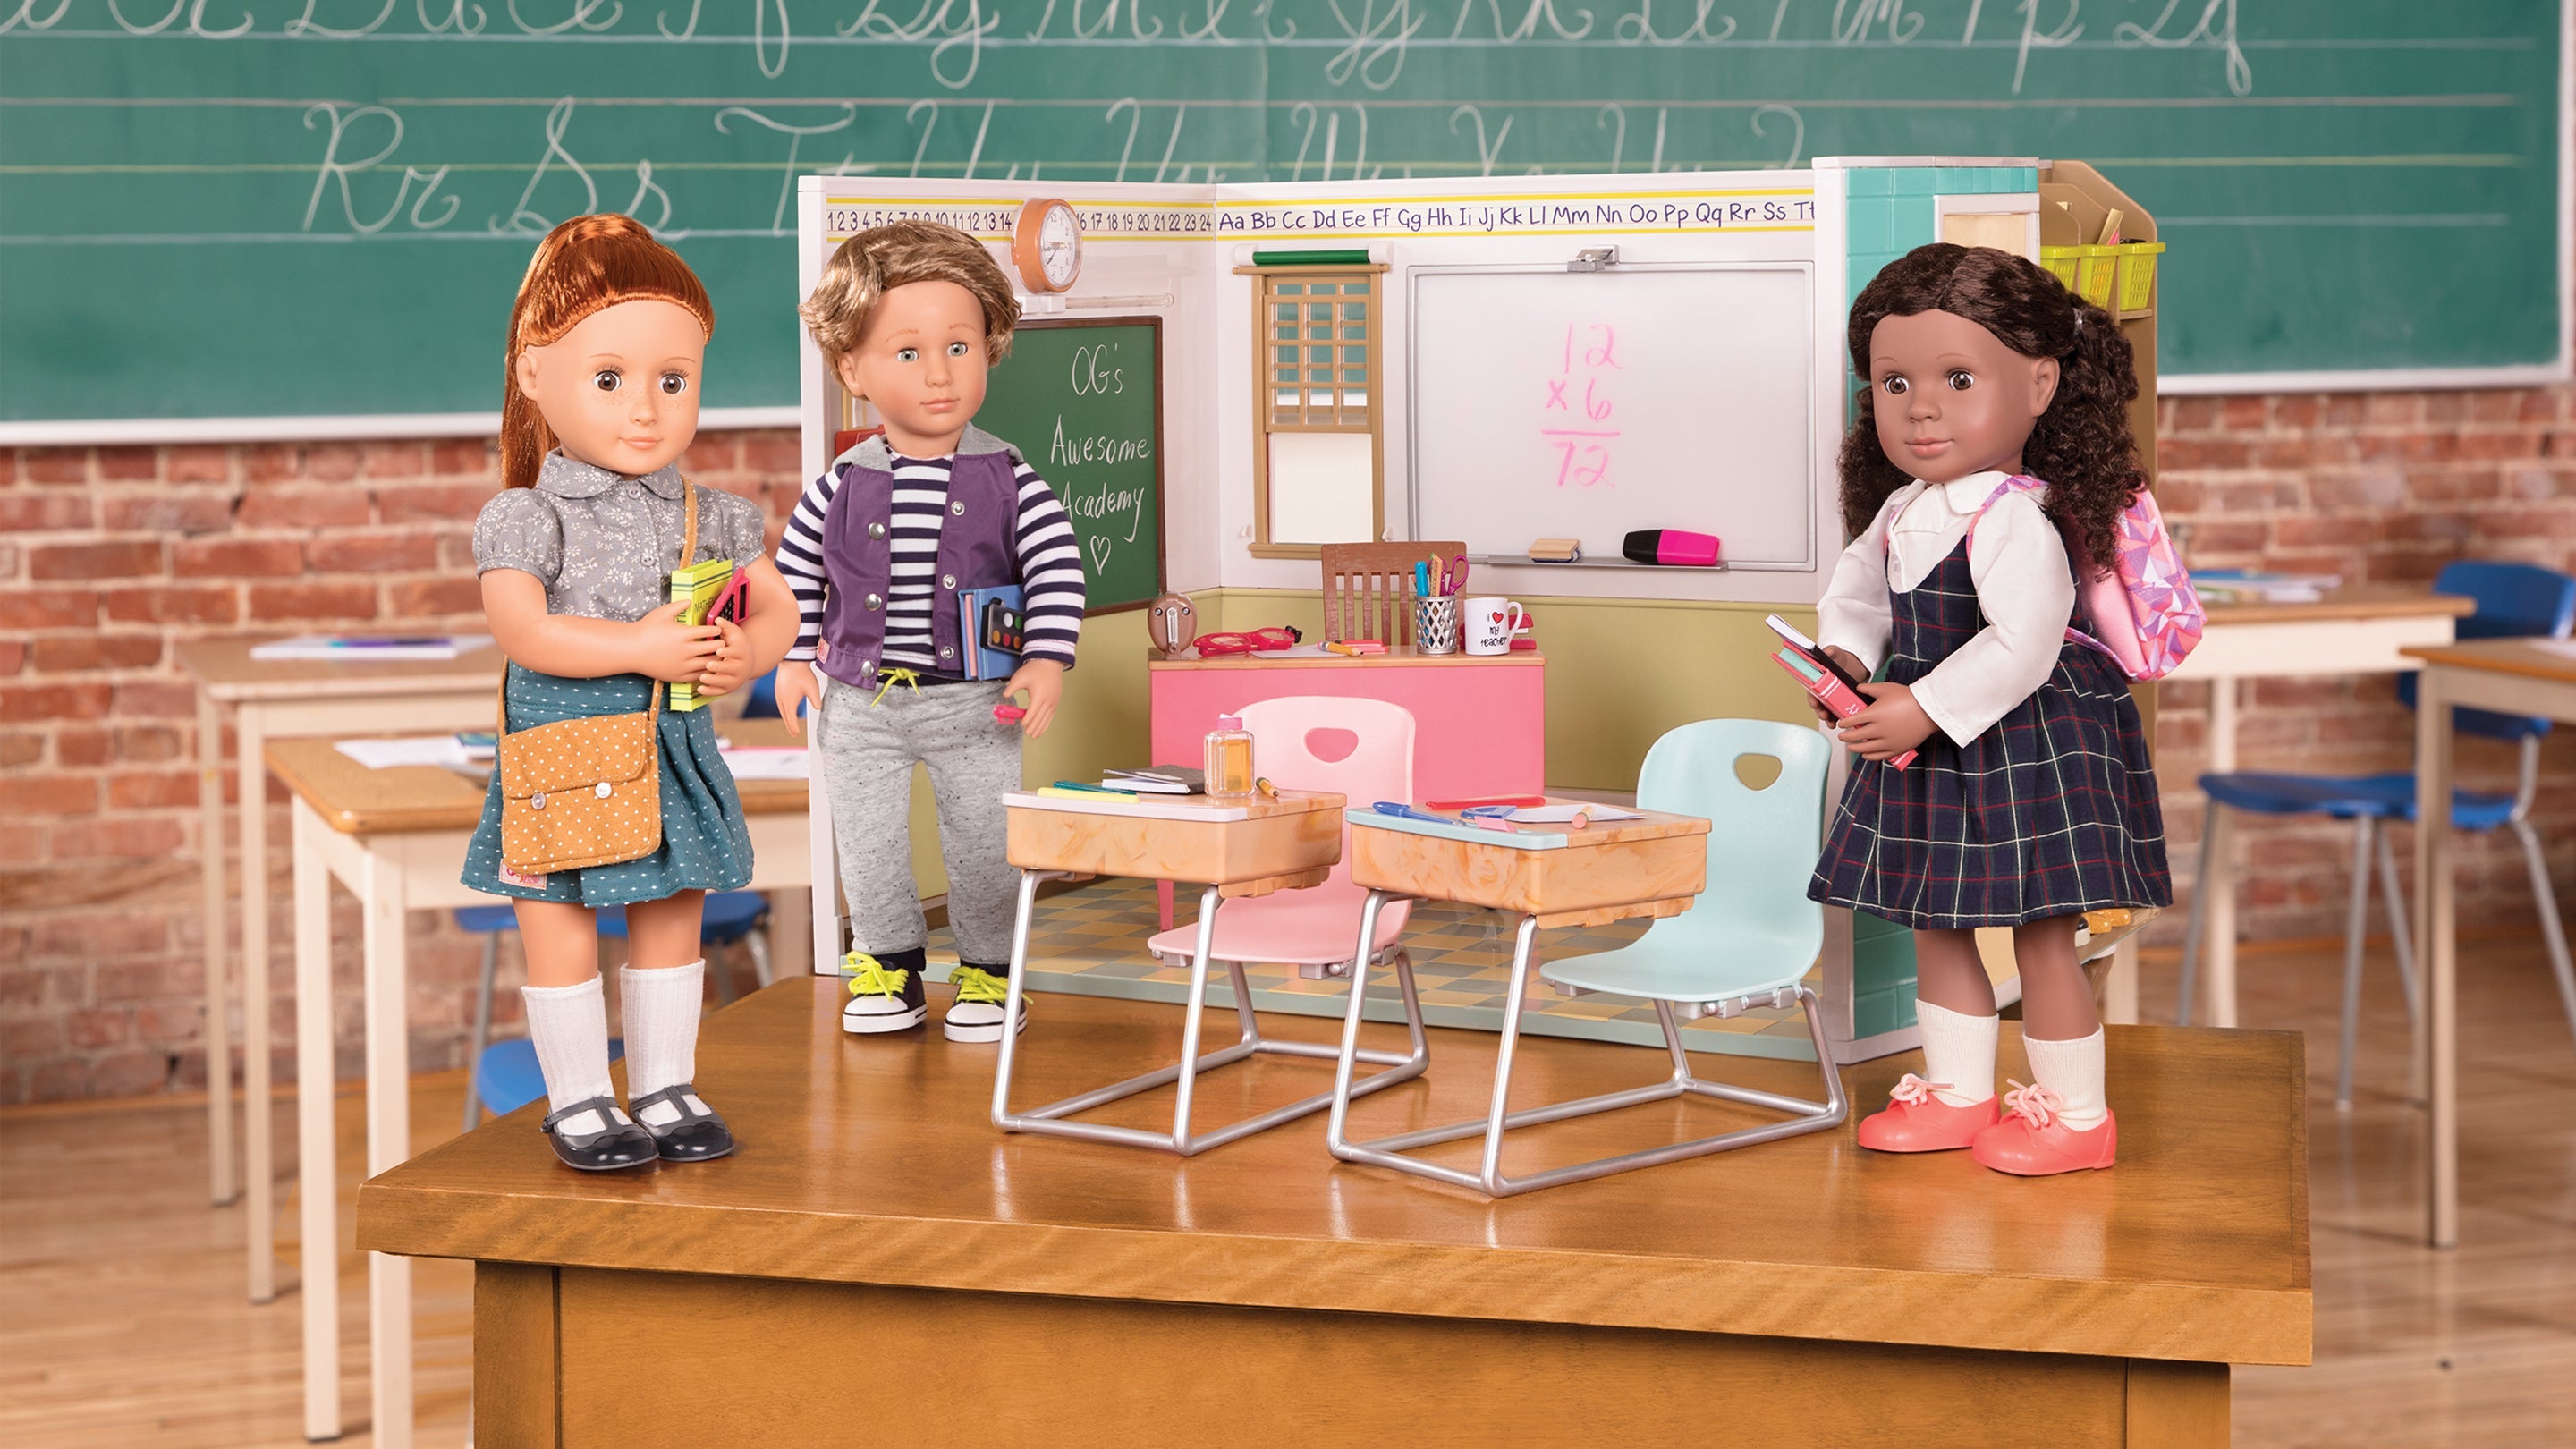 Our Generation, Awesome Academy, School Room for 18-inch Dolls